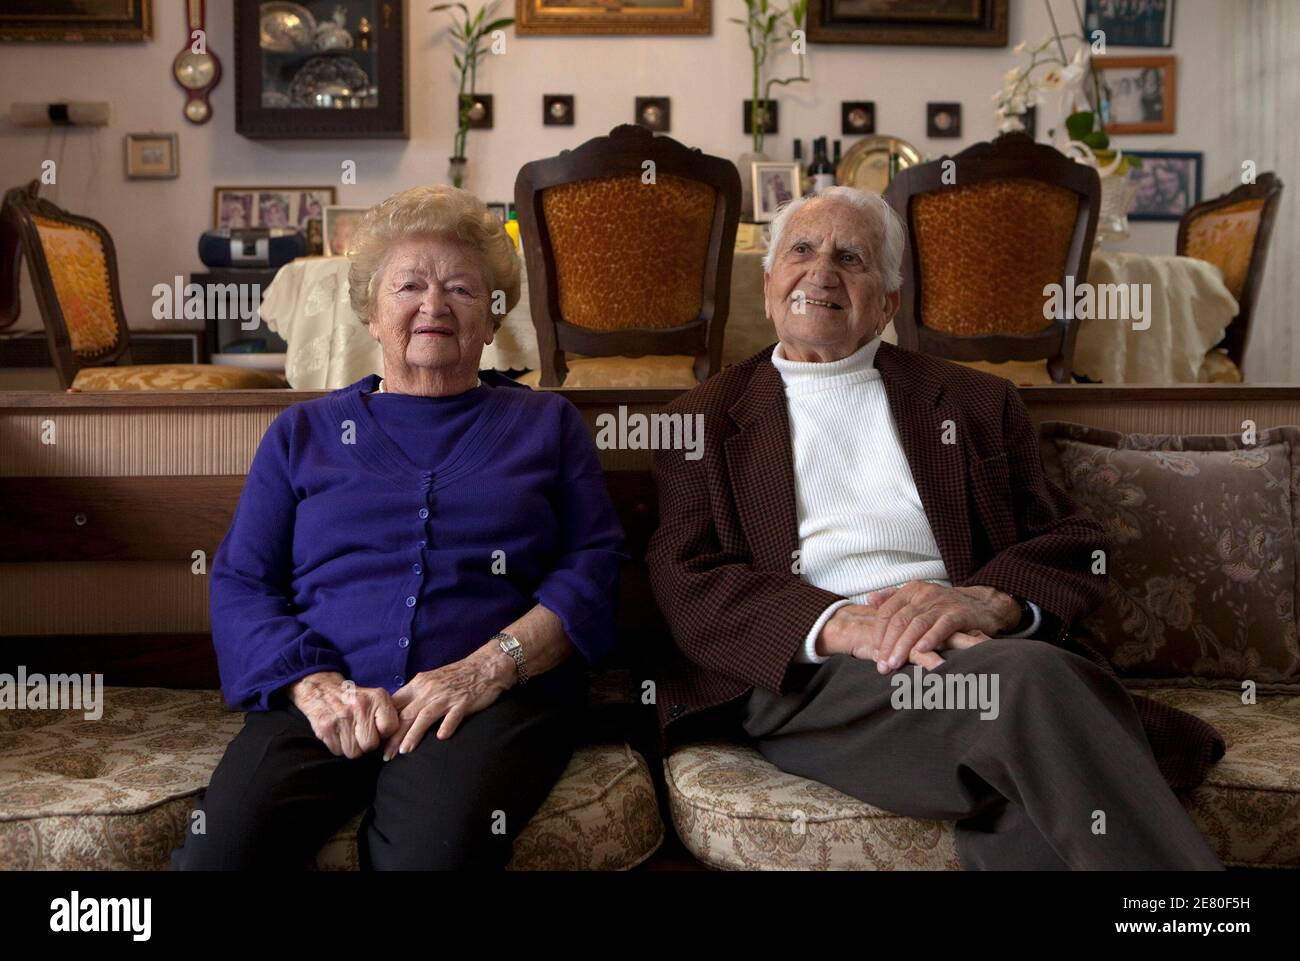 Holocaust survivors Yitzhak and Rina Birnhak, both Polish-born, sit in their home in the northern city of Haifa, ahead of Israel's Holocaust Remembrance Day, April 9, 2010. Yitzhak and Rina met in Krakow, Poland during World War Two and were among more than 1,000 Jews taken in by German industrialist Oskar Schindler. Spared death thanks to Schindler's insistence that German authorities leave them in his employ -- their names appeared on the now-famous 'Schindler's List' -- rather than deport them to concentration camps. The couple wed in British-ruled Palestine in 1946 and today have two child Stock Photo